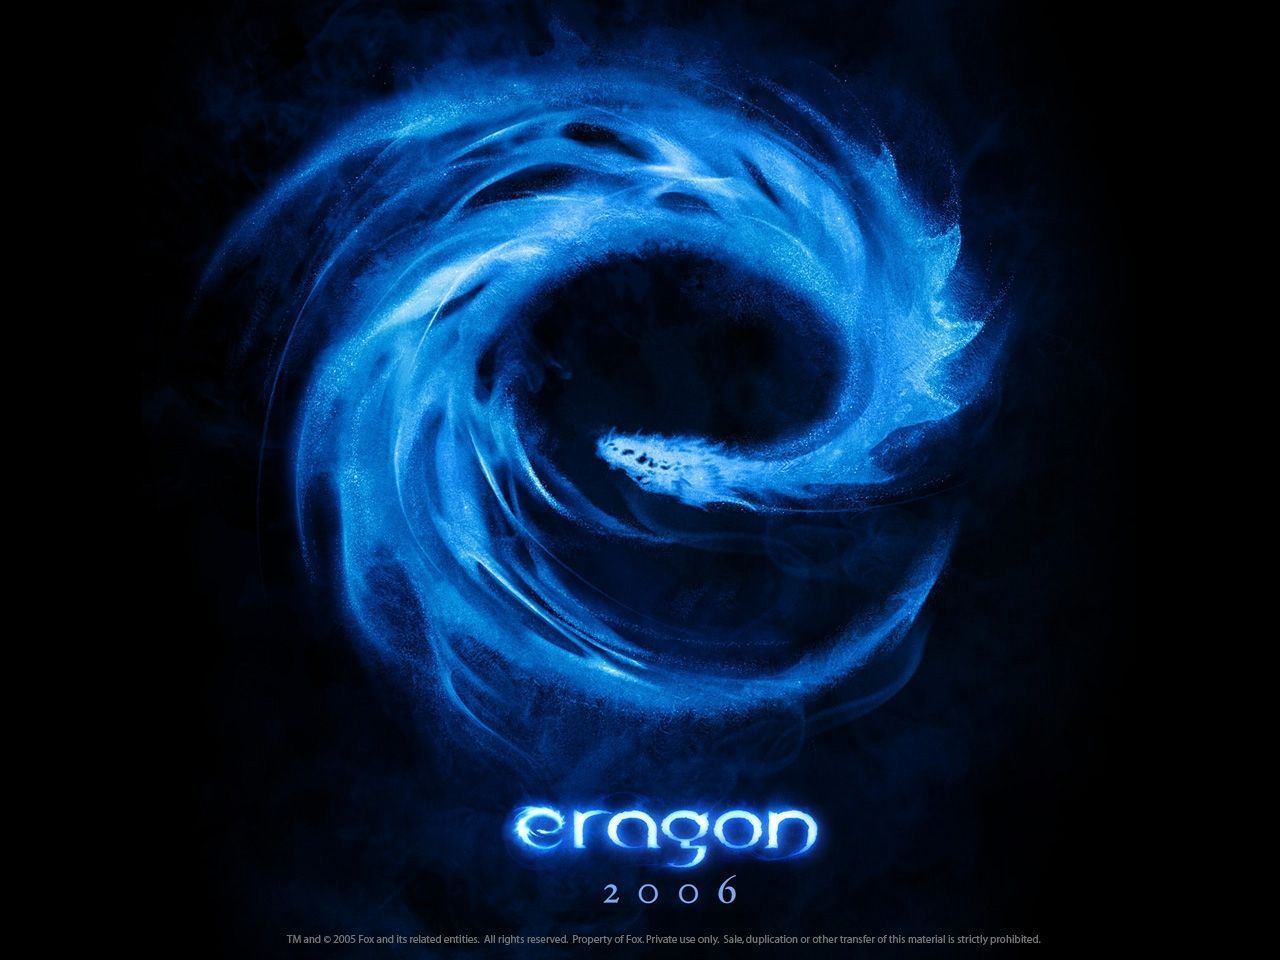 Eragon Image HD Wallpaper And Background Photos